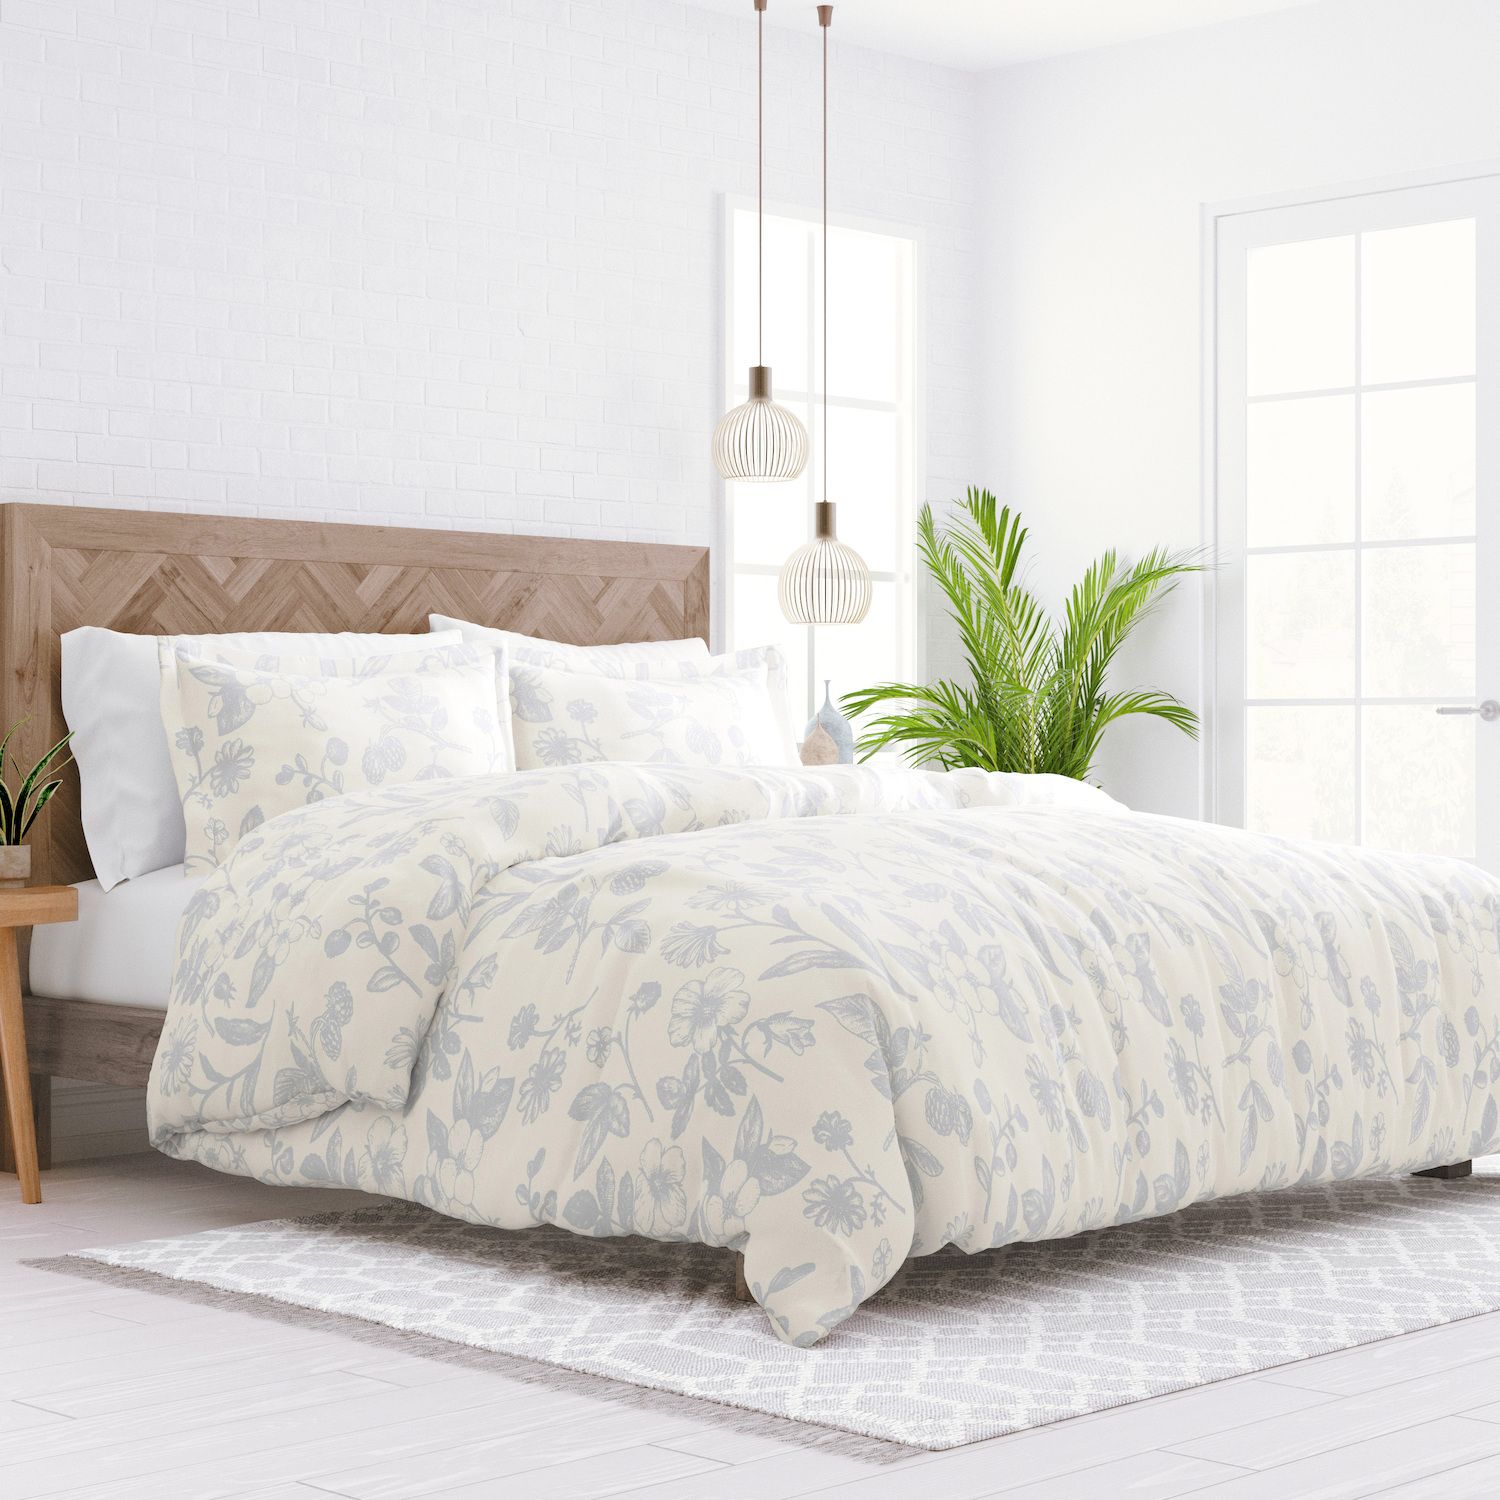 Image for Home Collection Premium Ultra Soft Garden Pattern Duvet Cover Set at Kohl's.